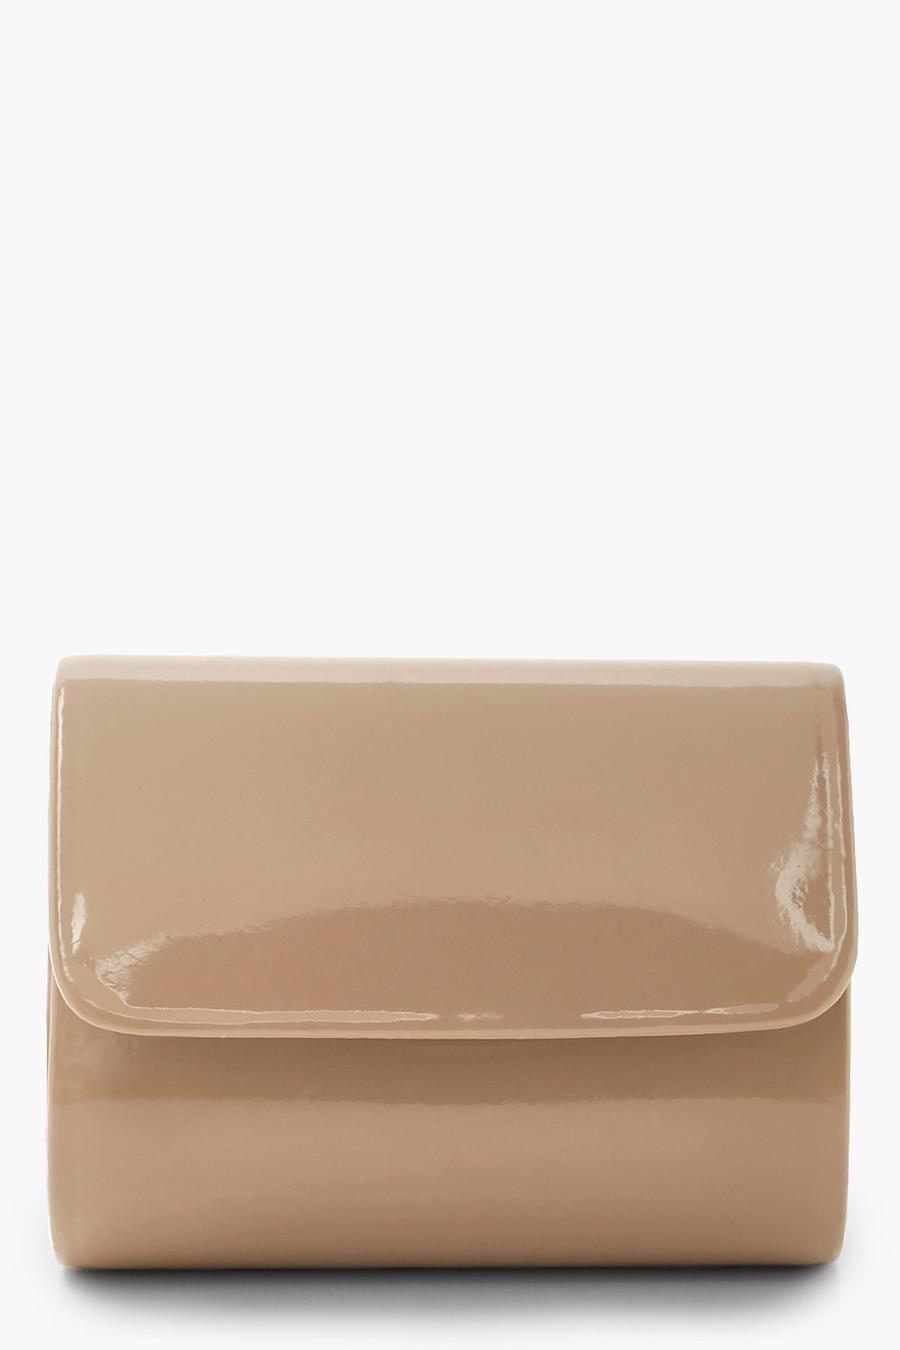 Taupe beis Mini Structured Patent Clutch Bag & Chain